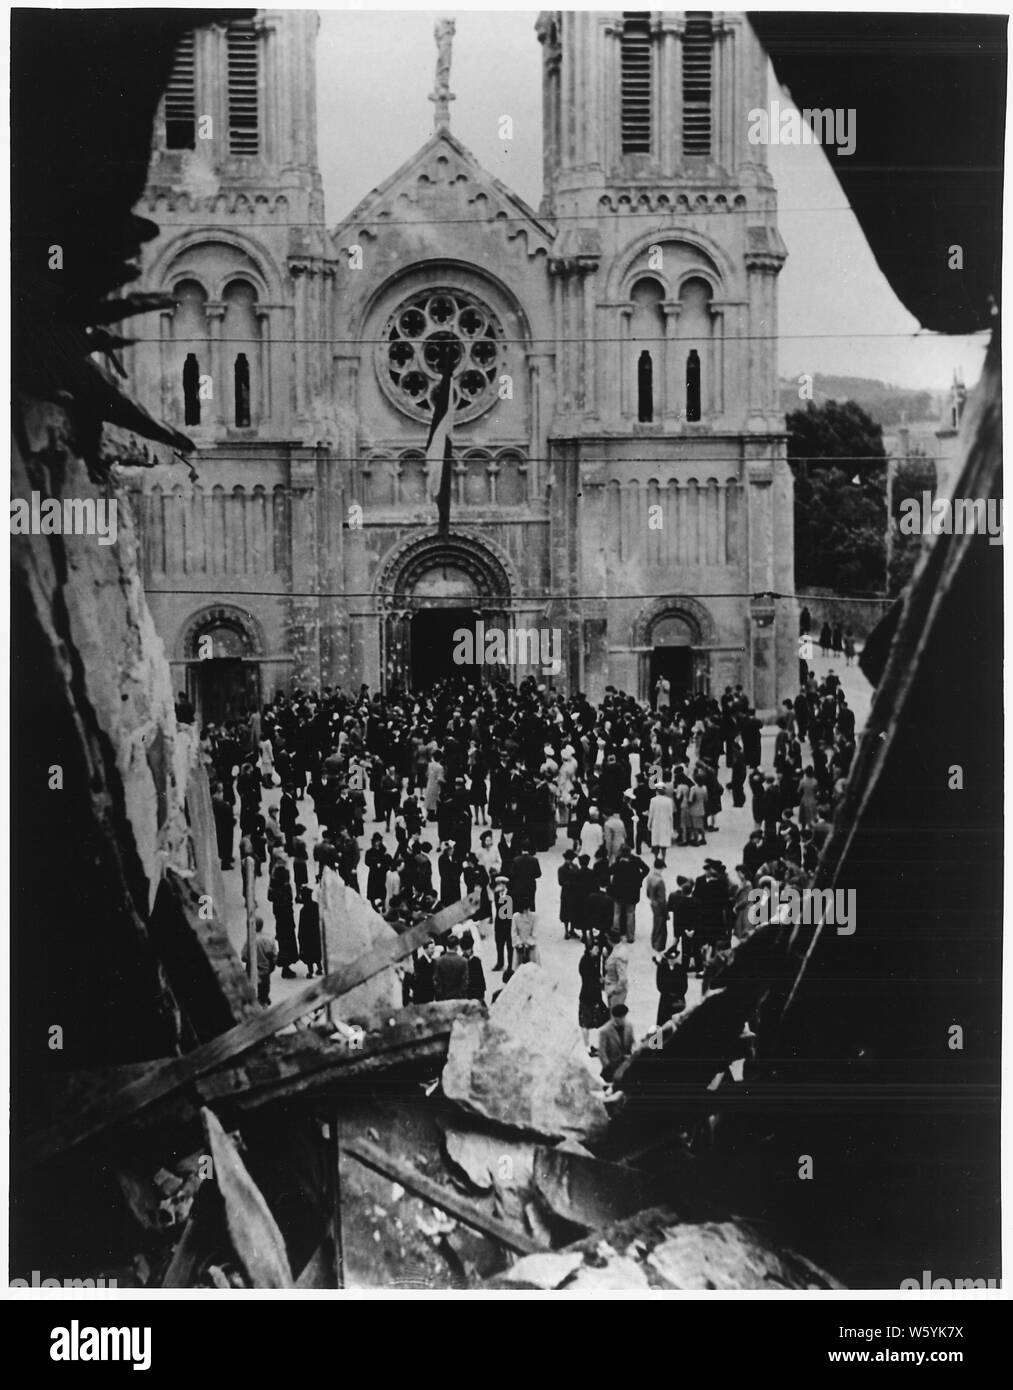 WWII: Europe: Cherbourg, France; Civilians; Scene from ruins of Notre Dame des Voeux. Stock Photo